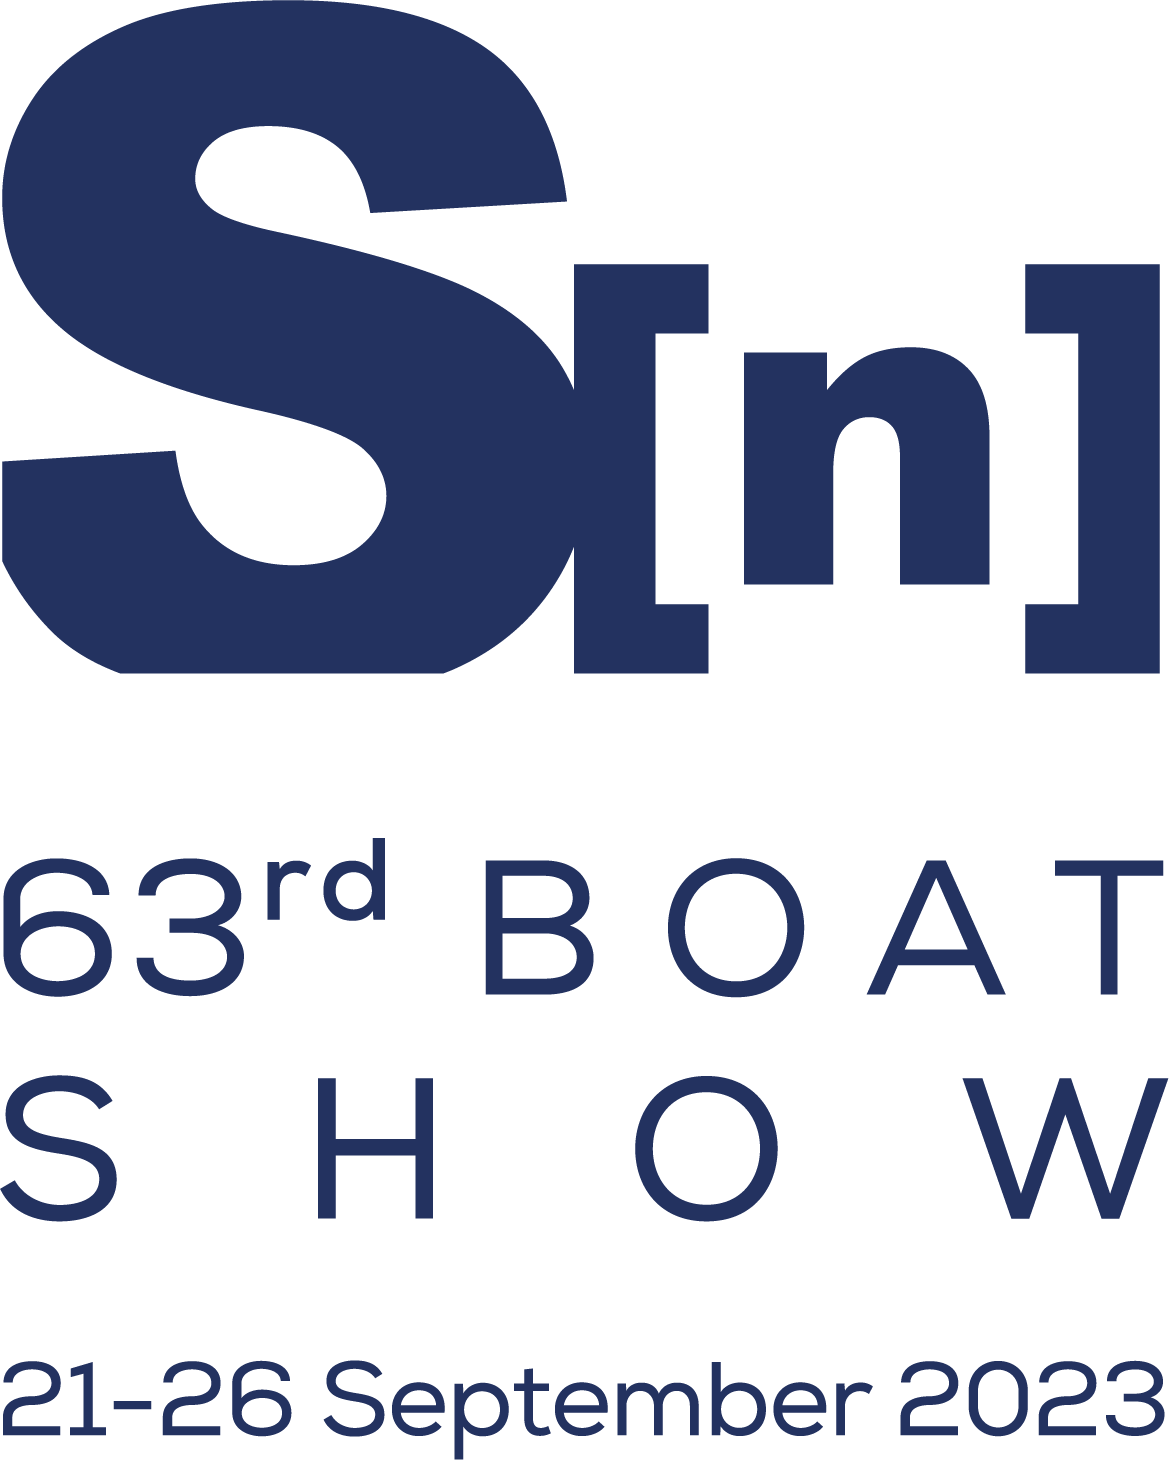 63rd International Genoa Boat Show logo - blue and white vertical version